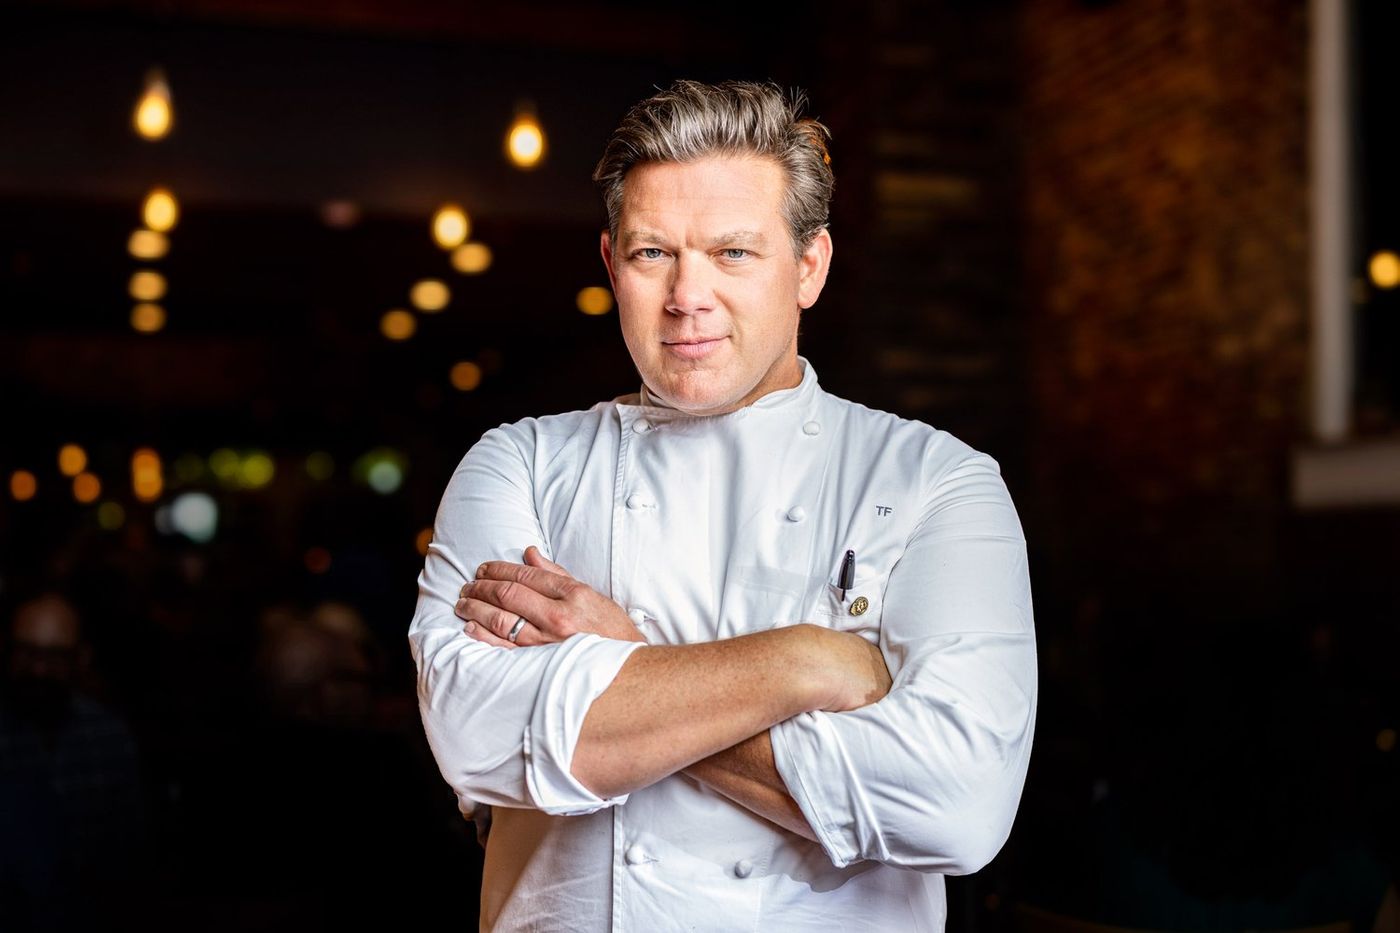 TYLER FLORENCE, Celebrity Chef